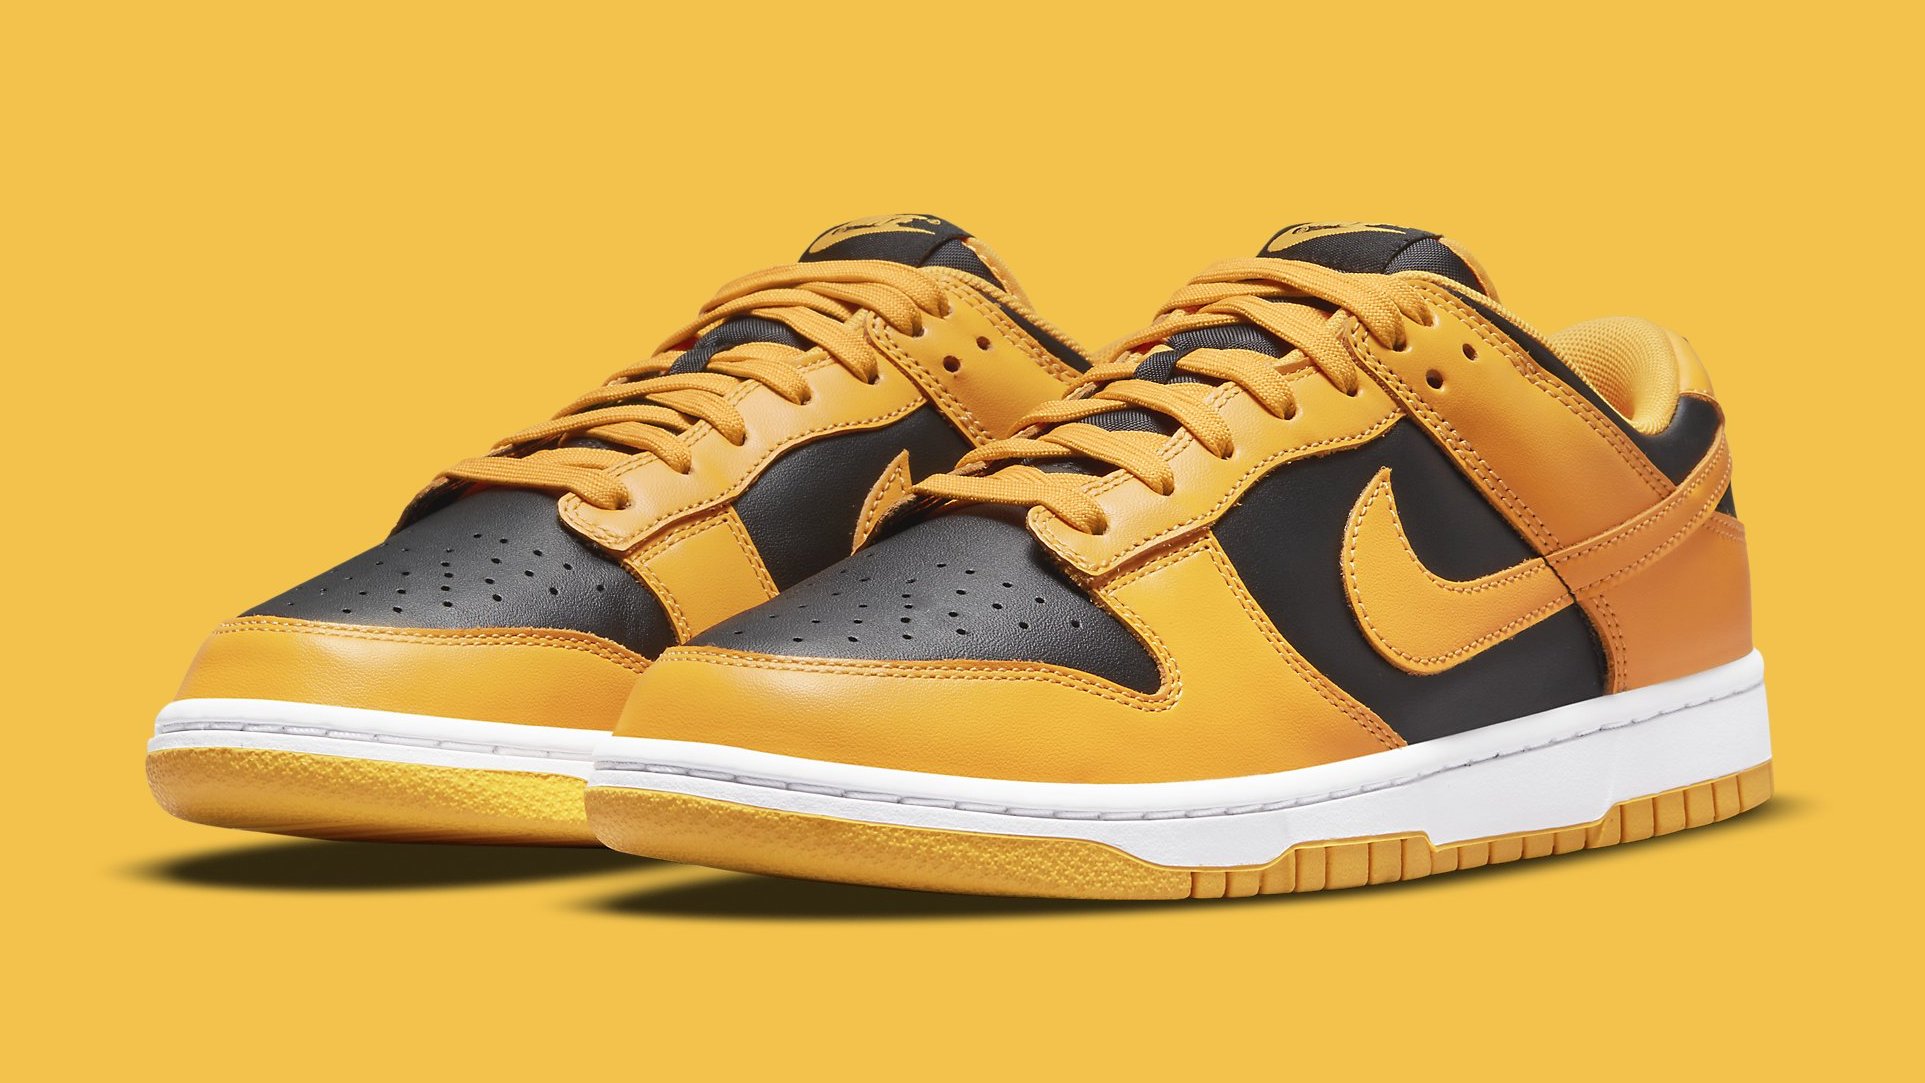 This Year's 'Goldenrod' Nike Dunks Get an Official Release Date